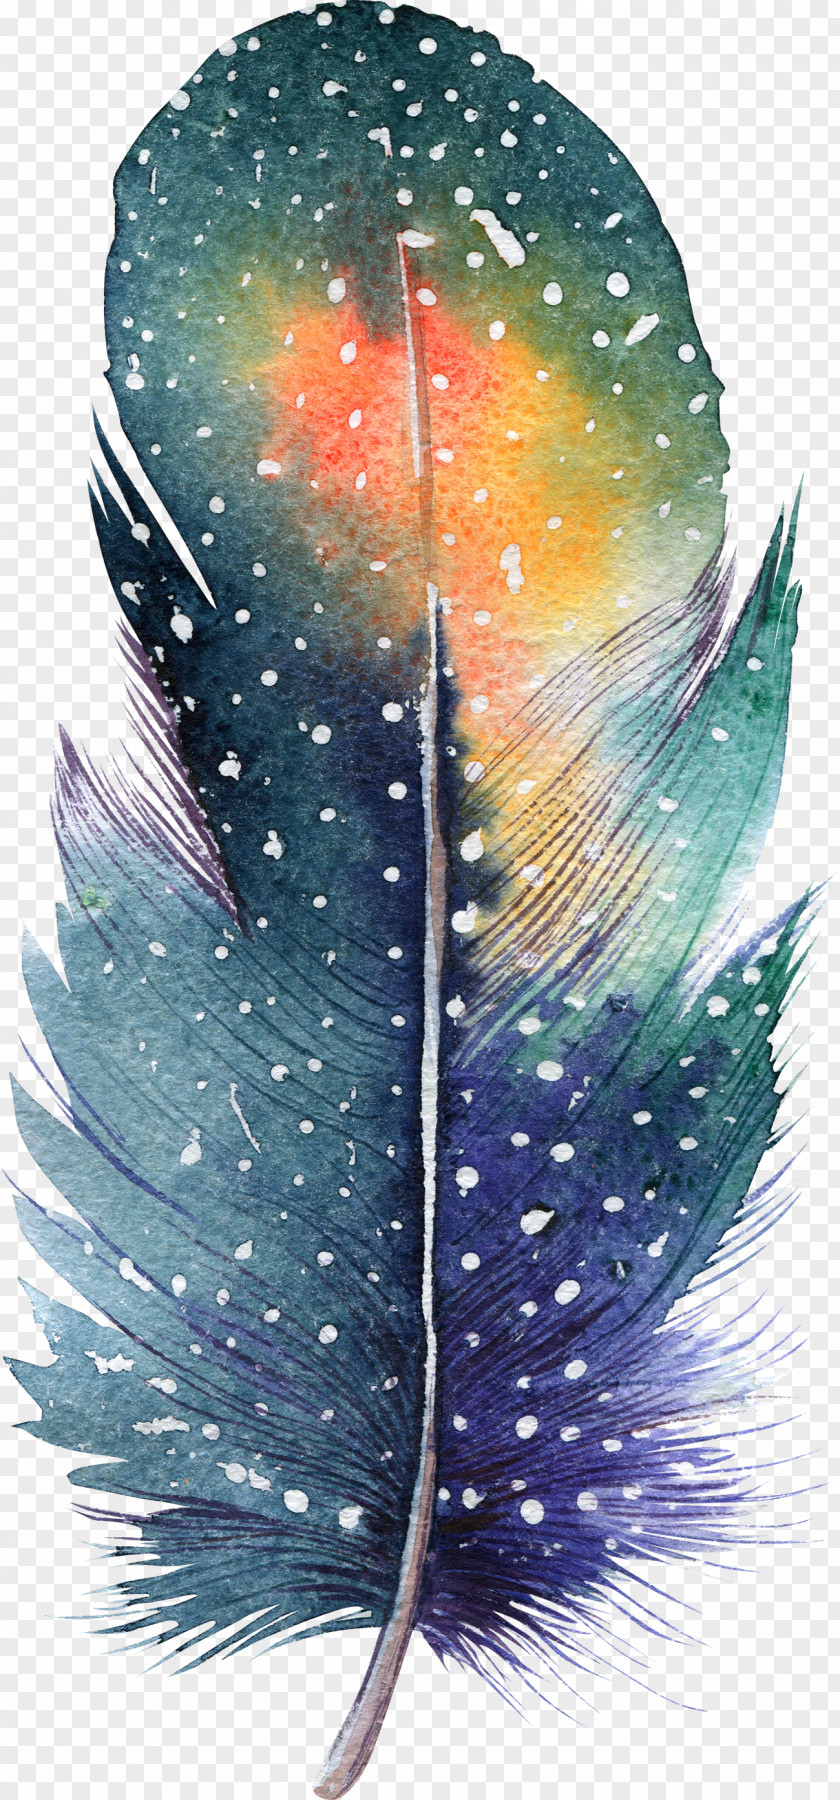 Feather Watercolor Painting Drawing Illustration PNG